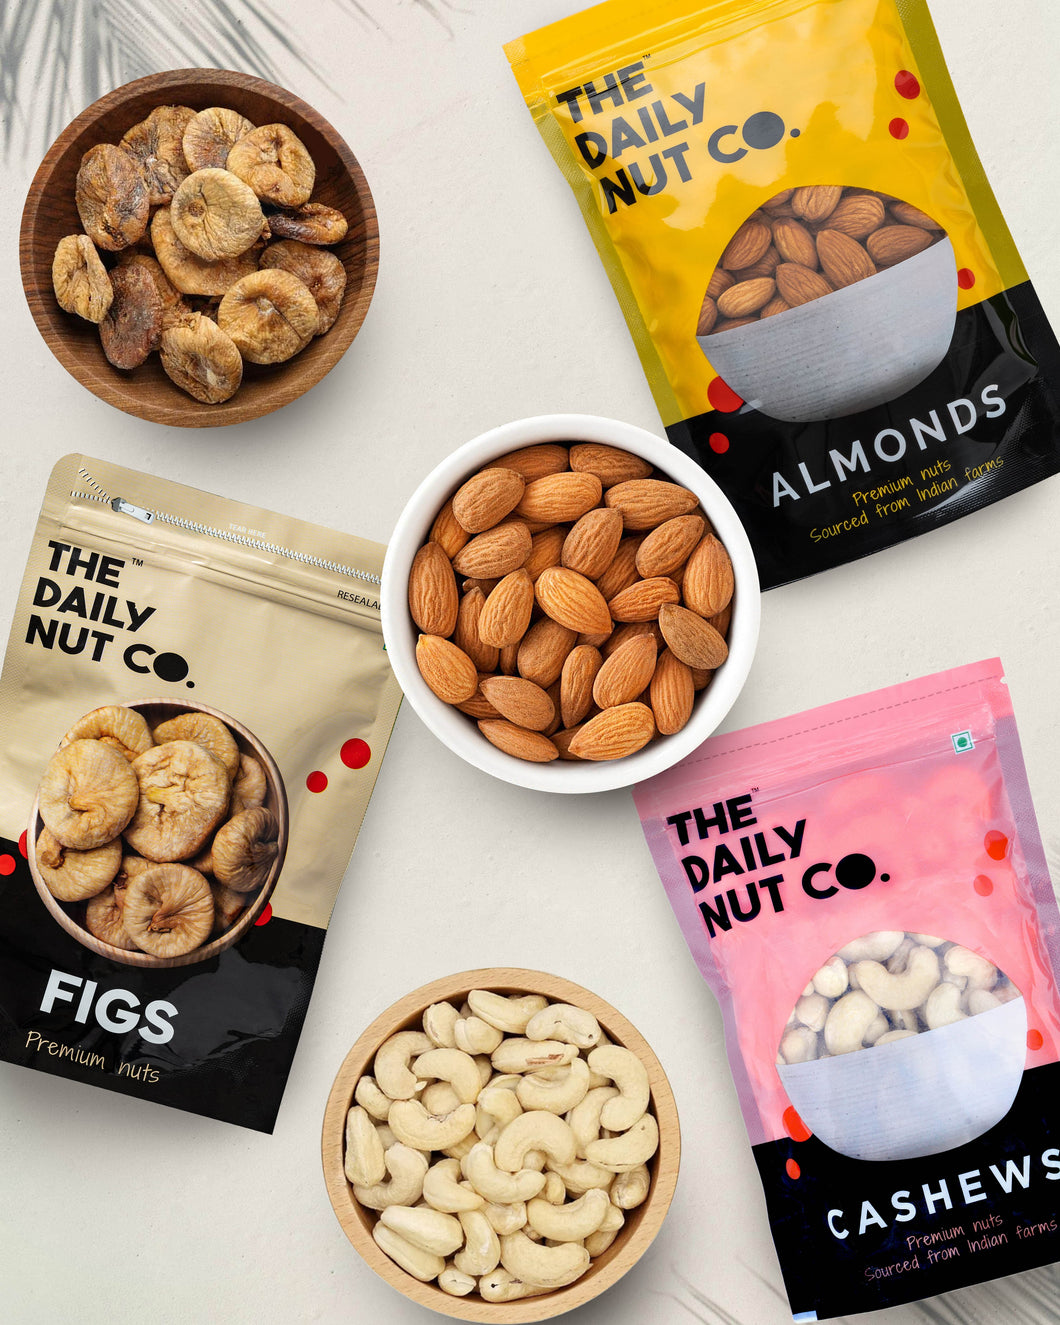 Almond, Cashew and Figs Combo | 650 grams | Premium Nuts